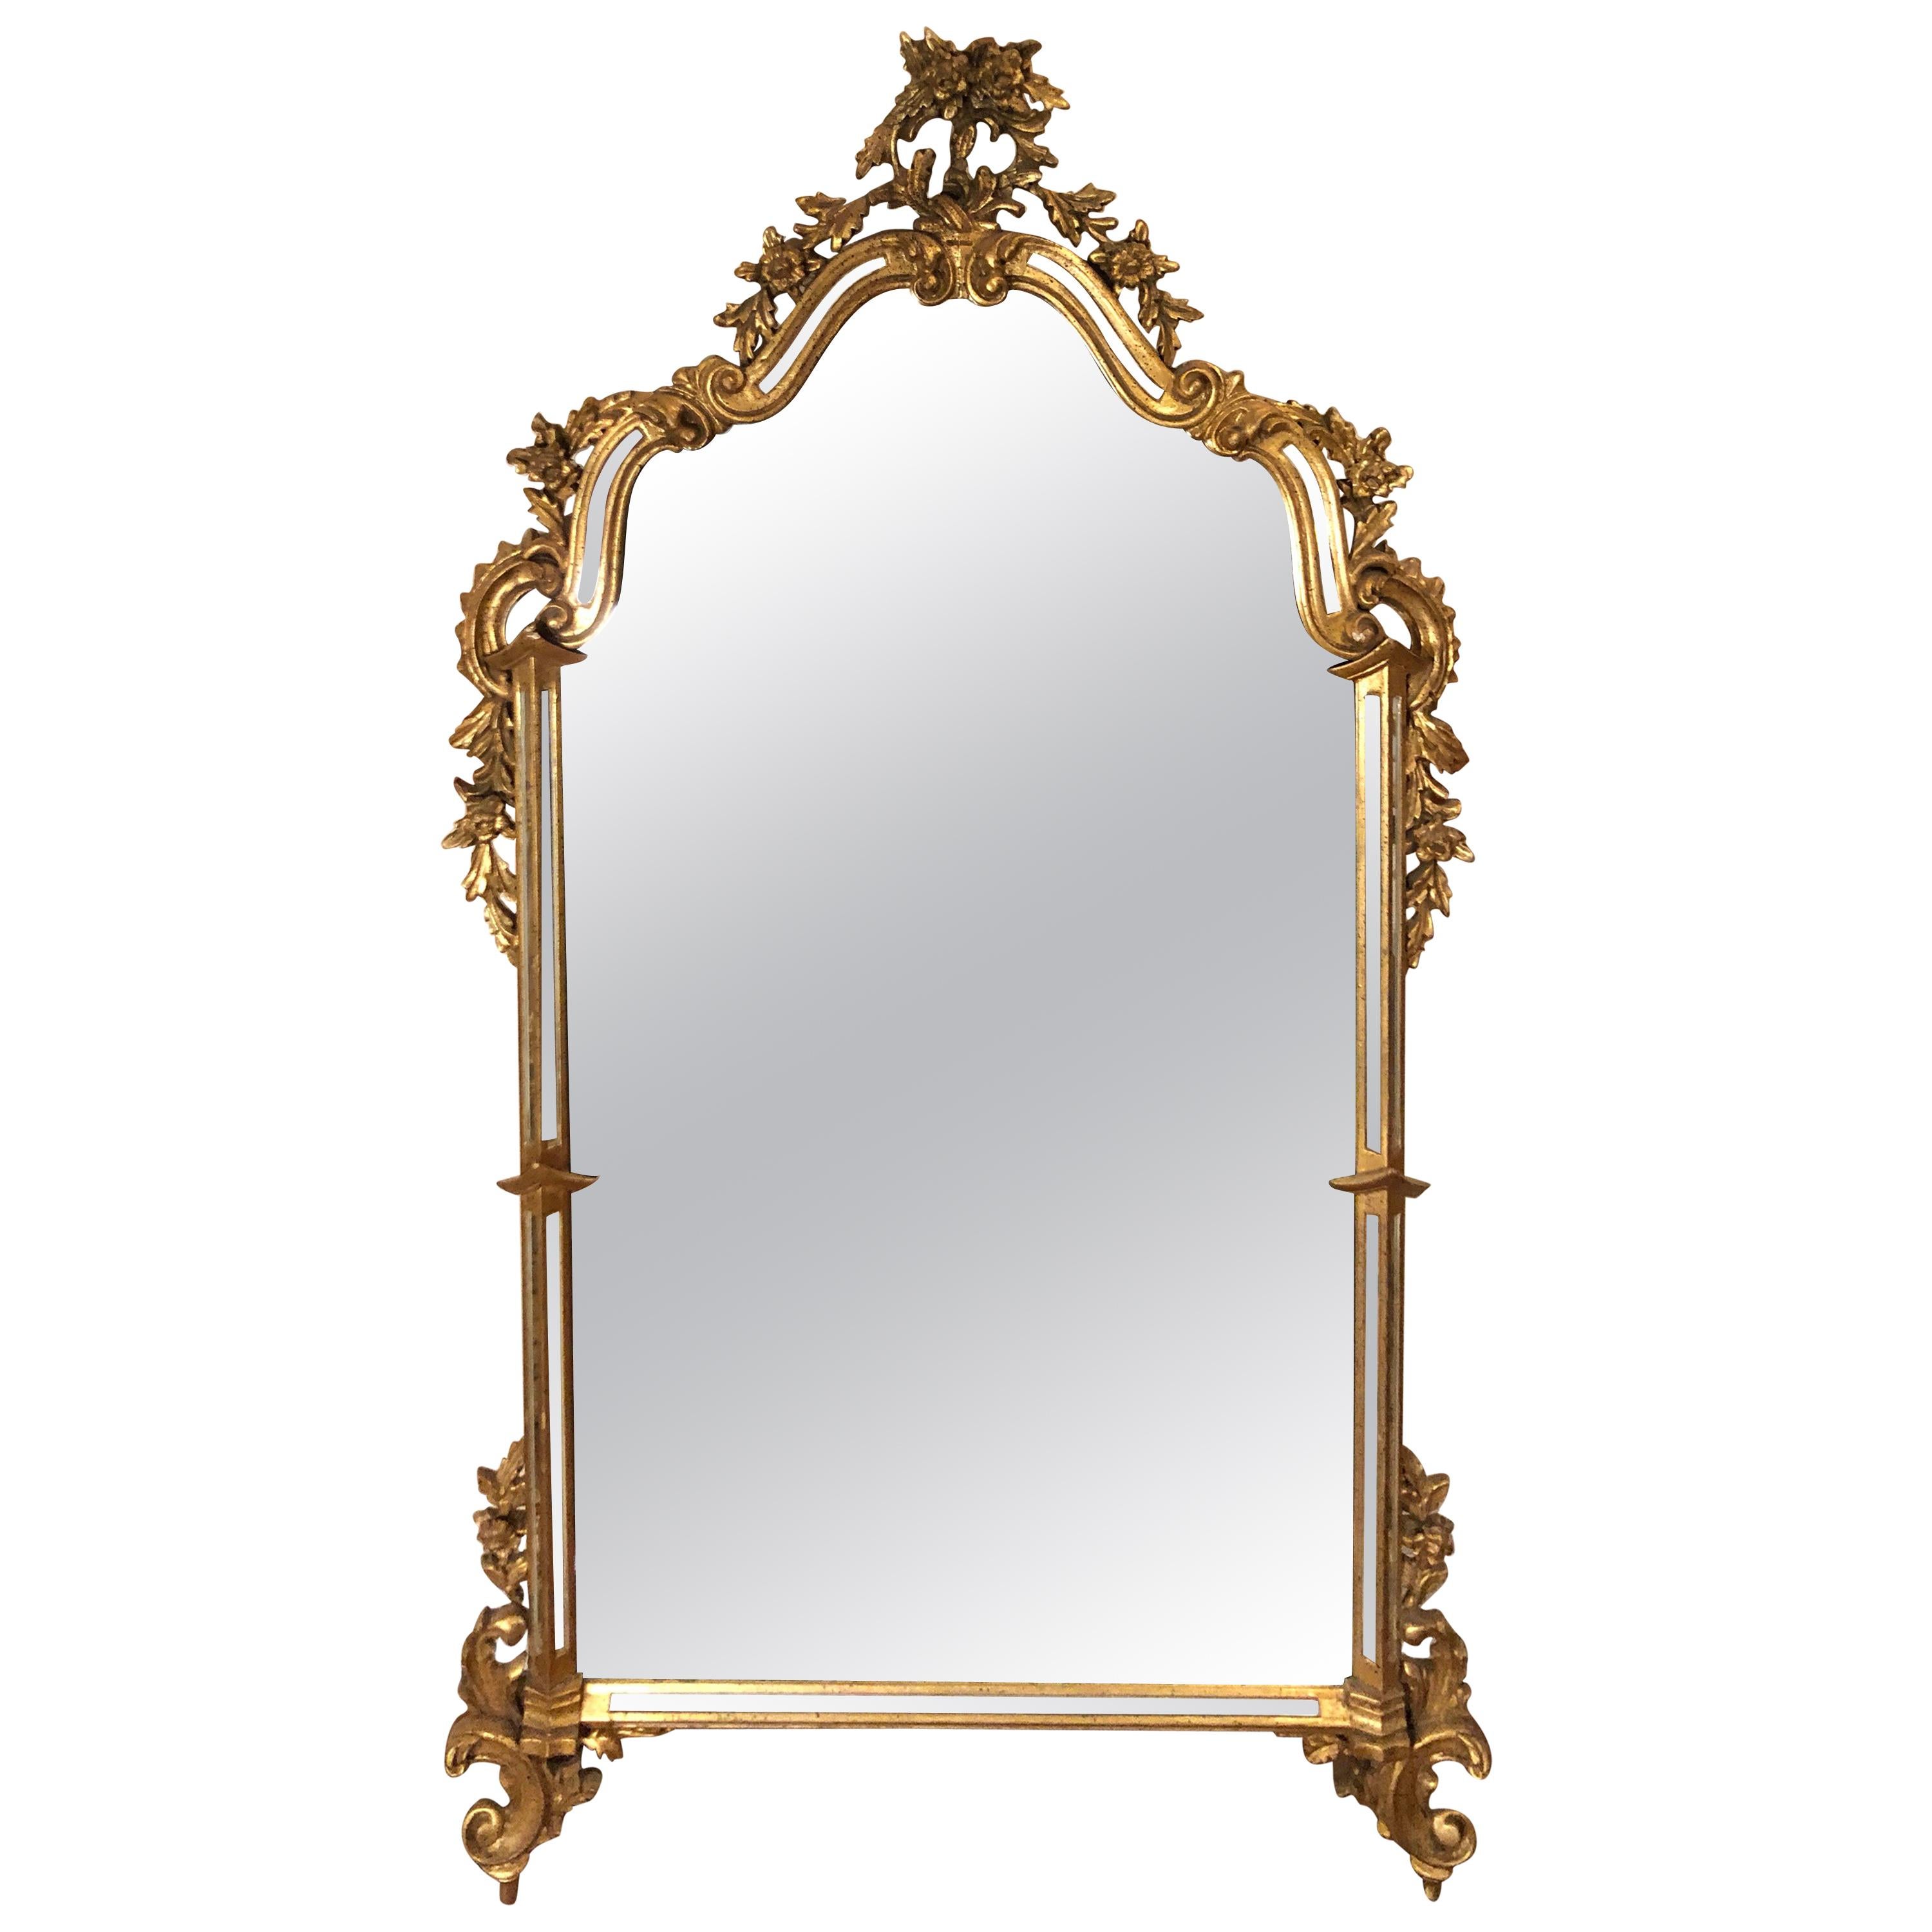 Vintage Ornate Gilt Mirror Attributed to Labarge